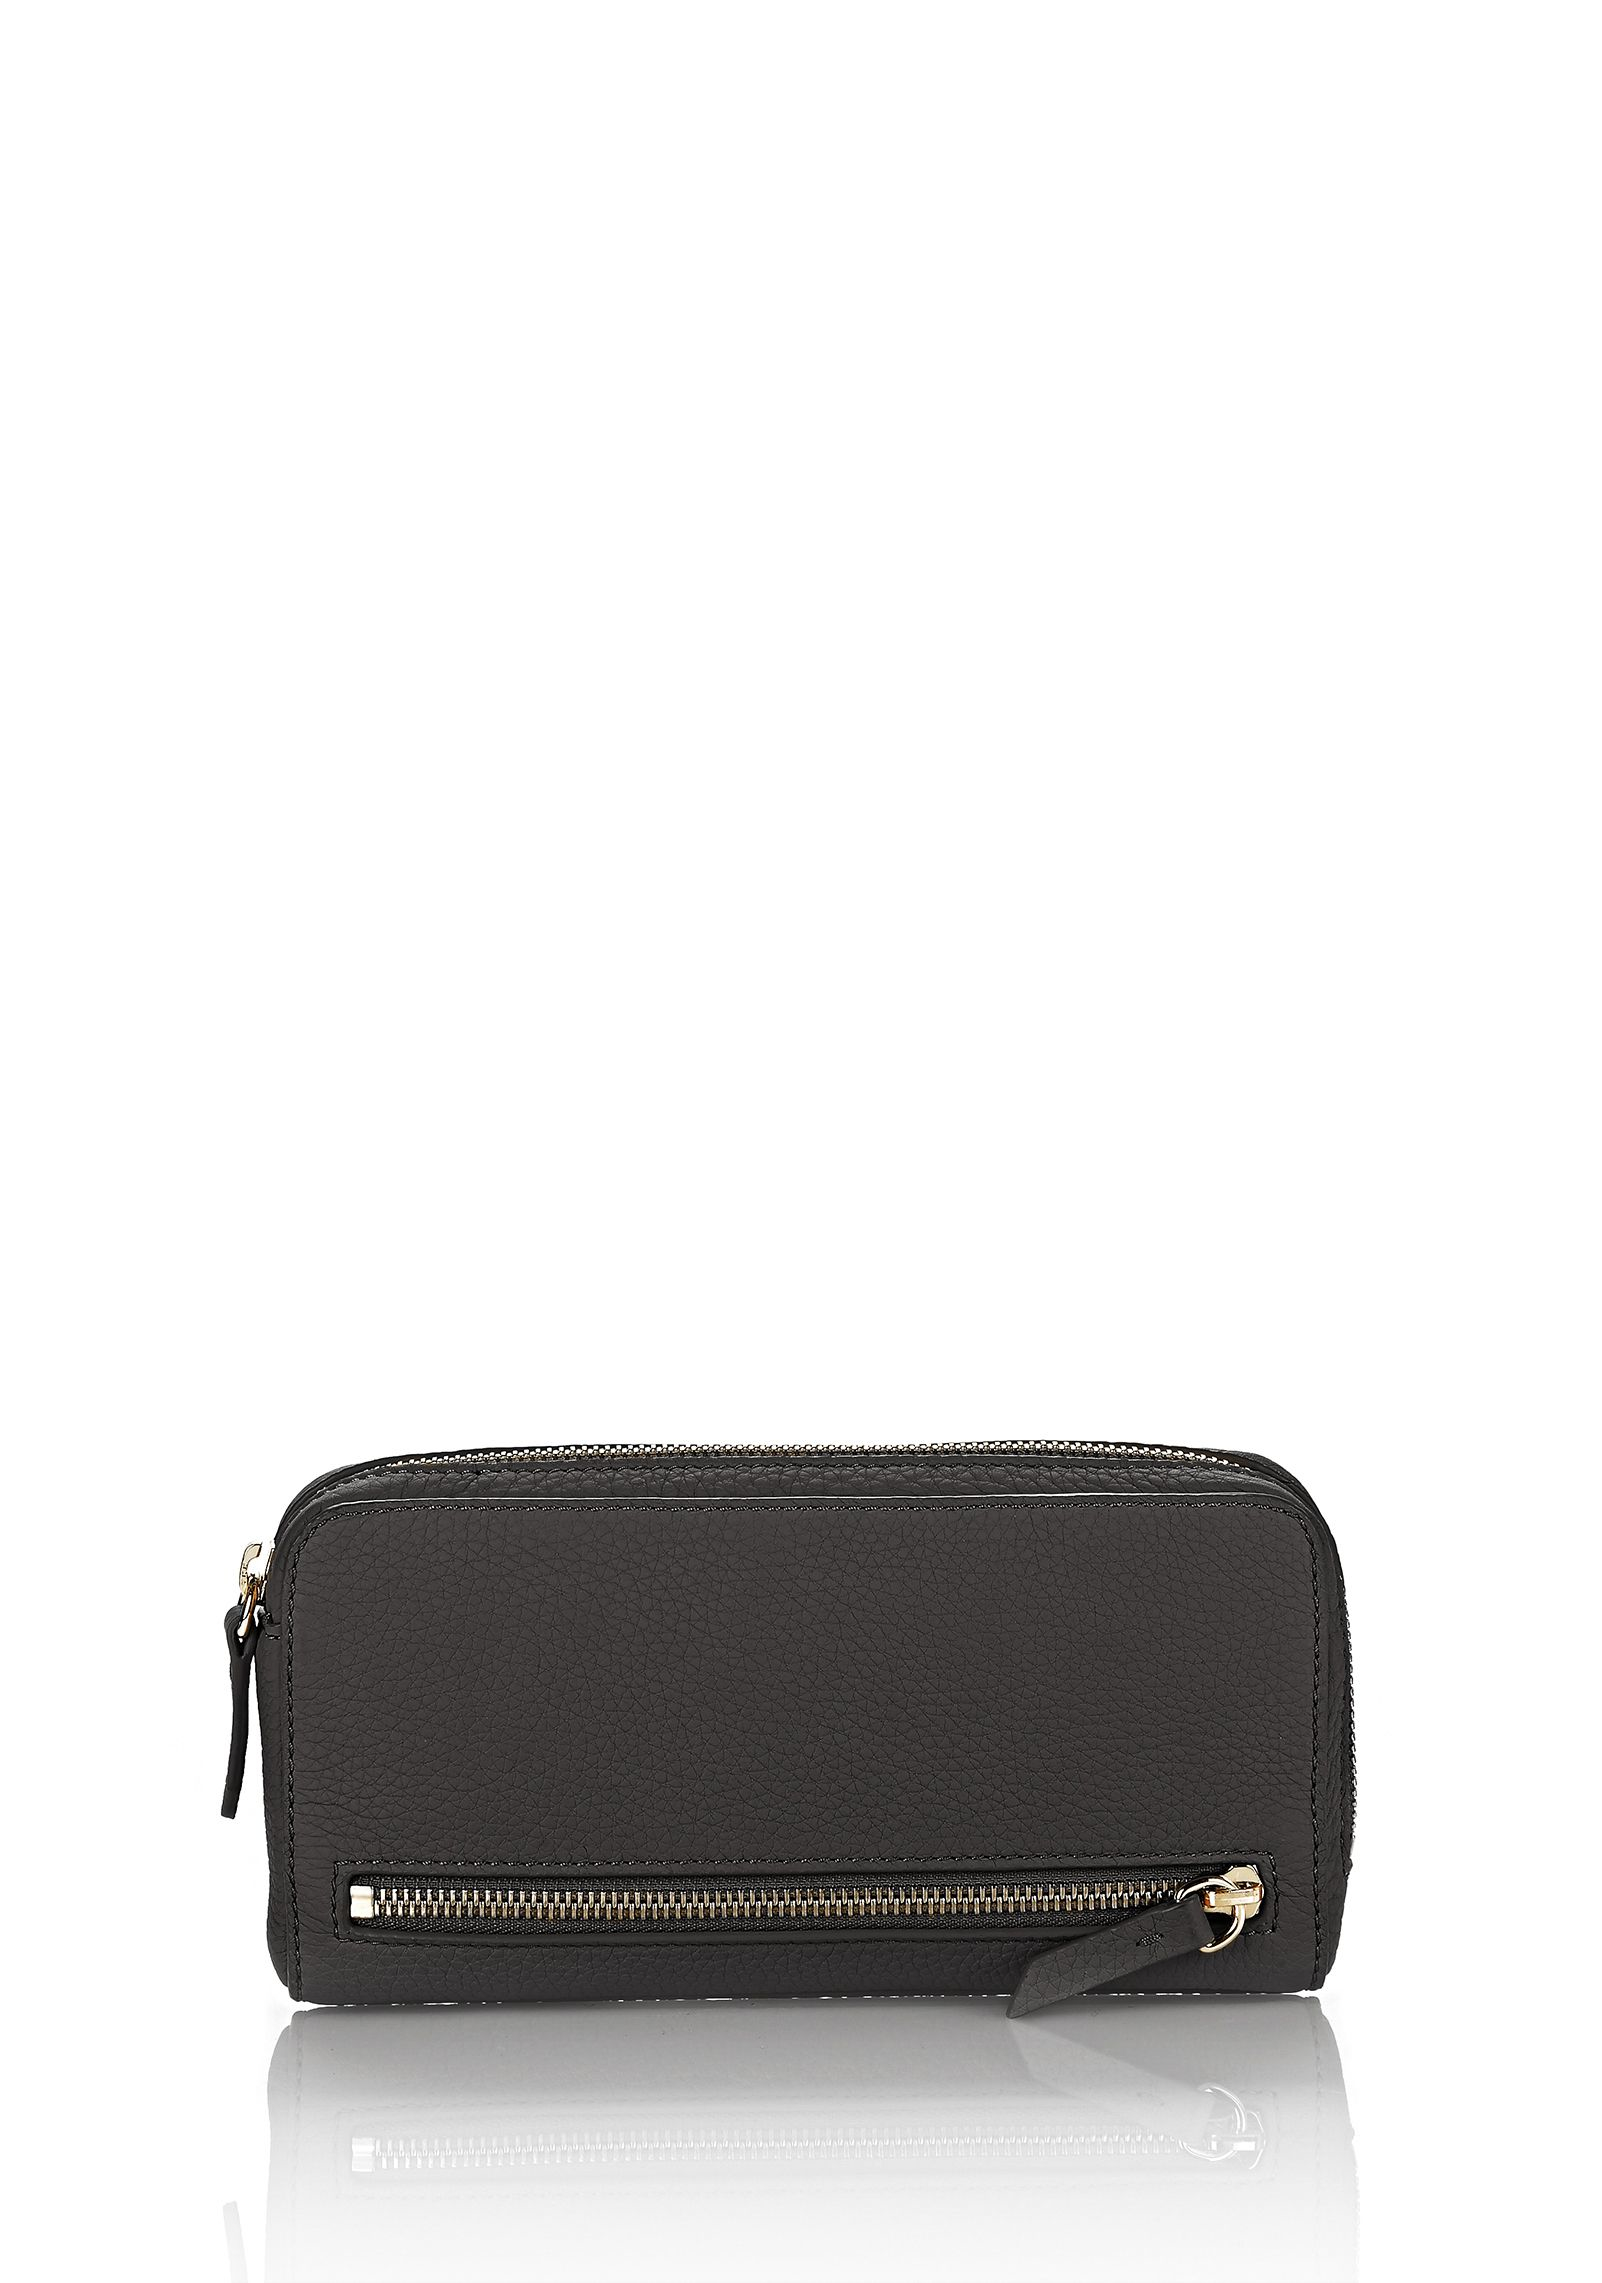 Alexander wang Fumo Continental Wallet In Pebbled Black With Pale Gold ...